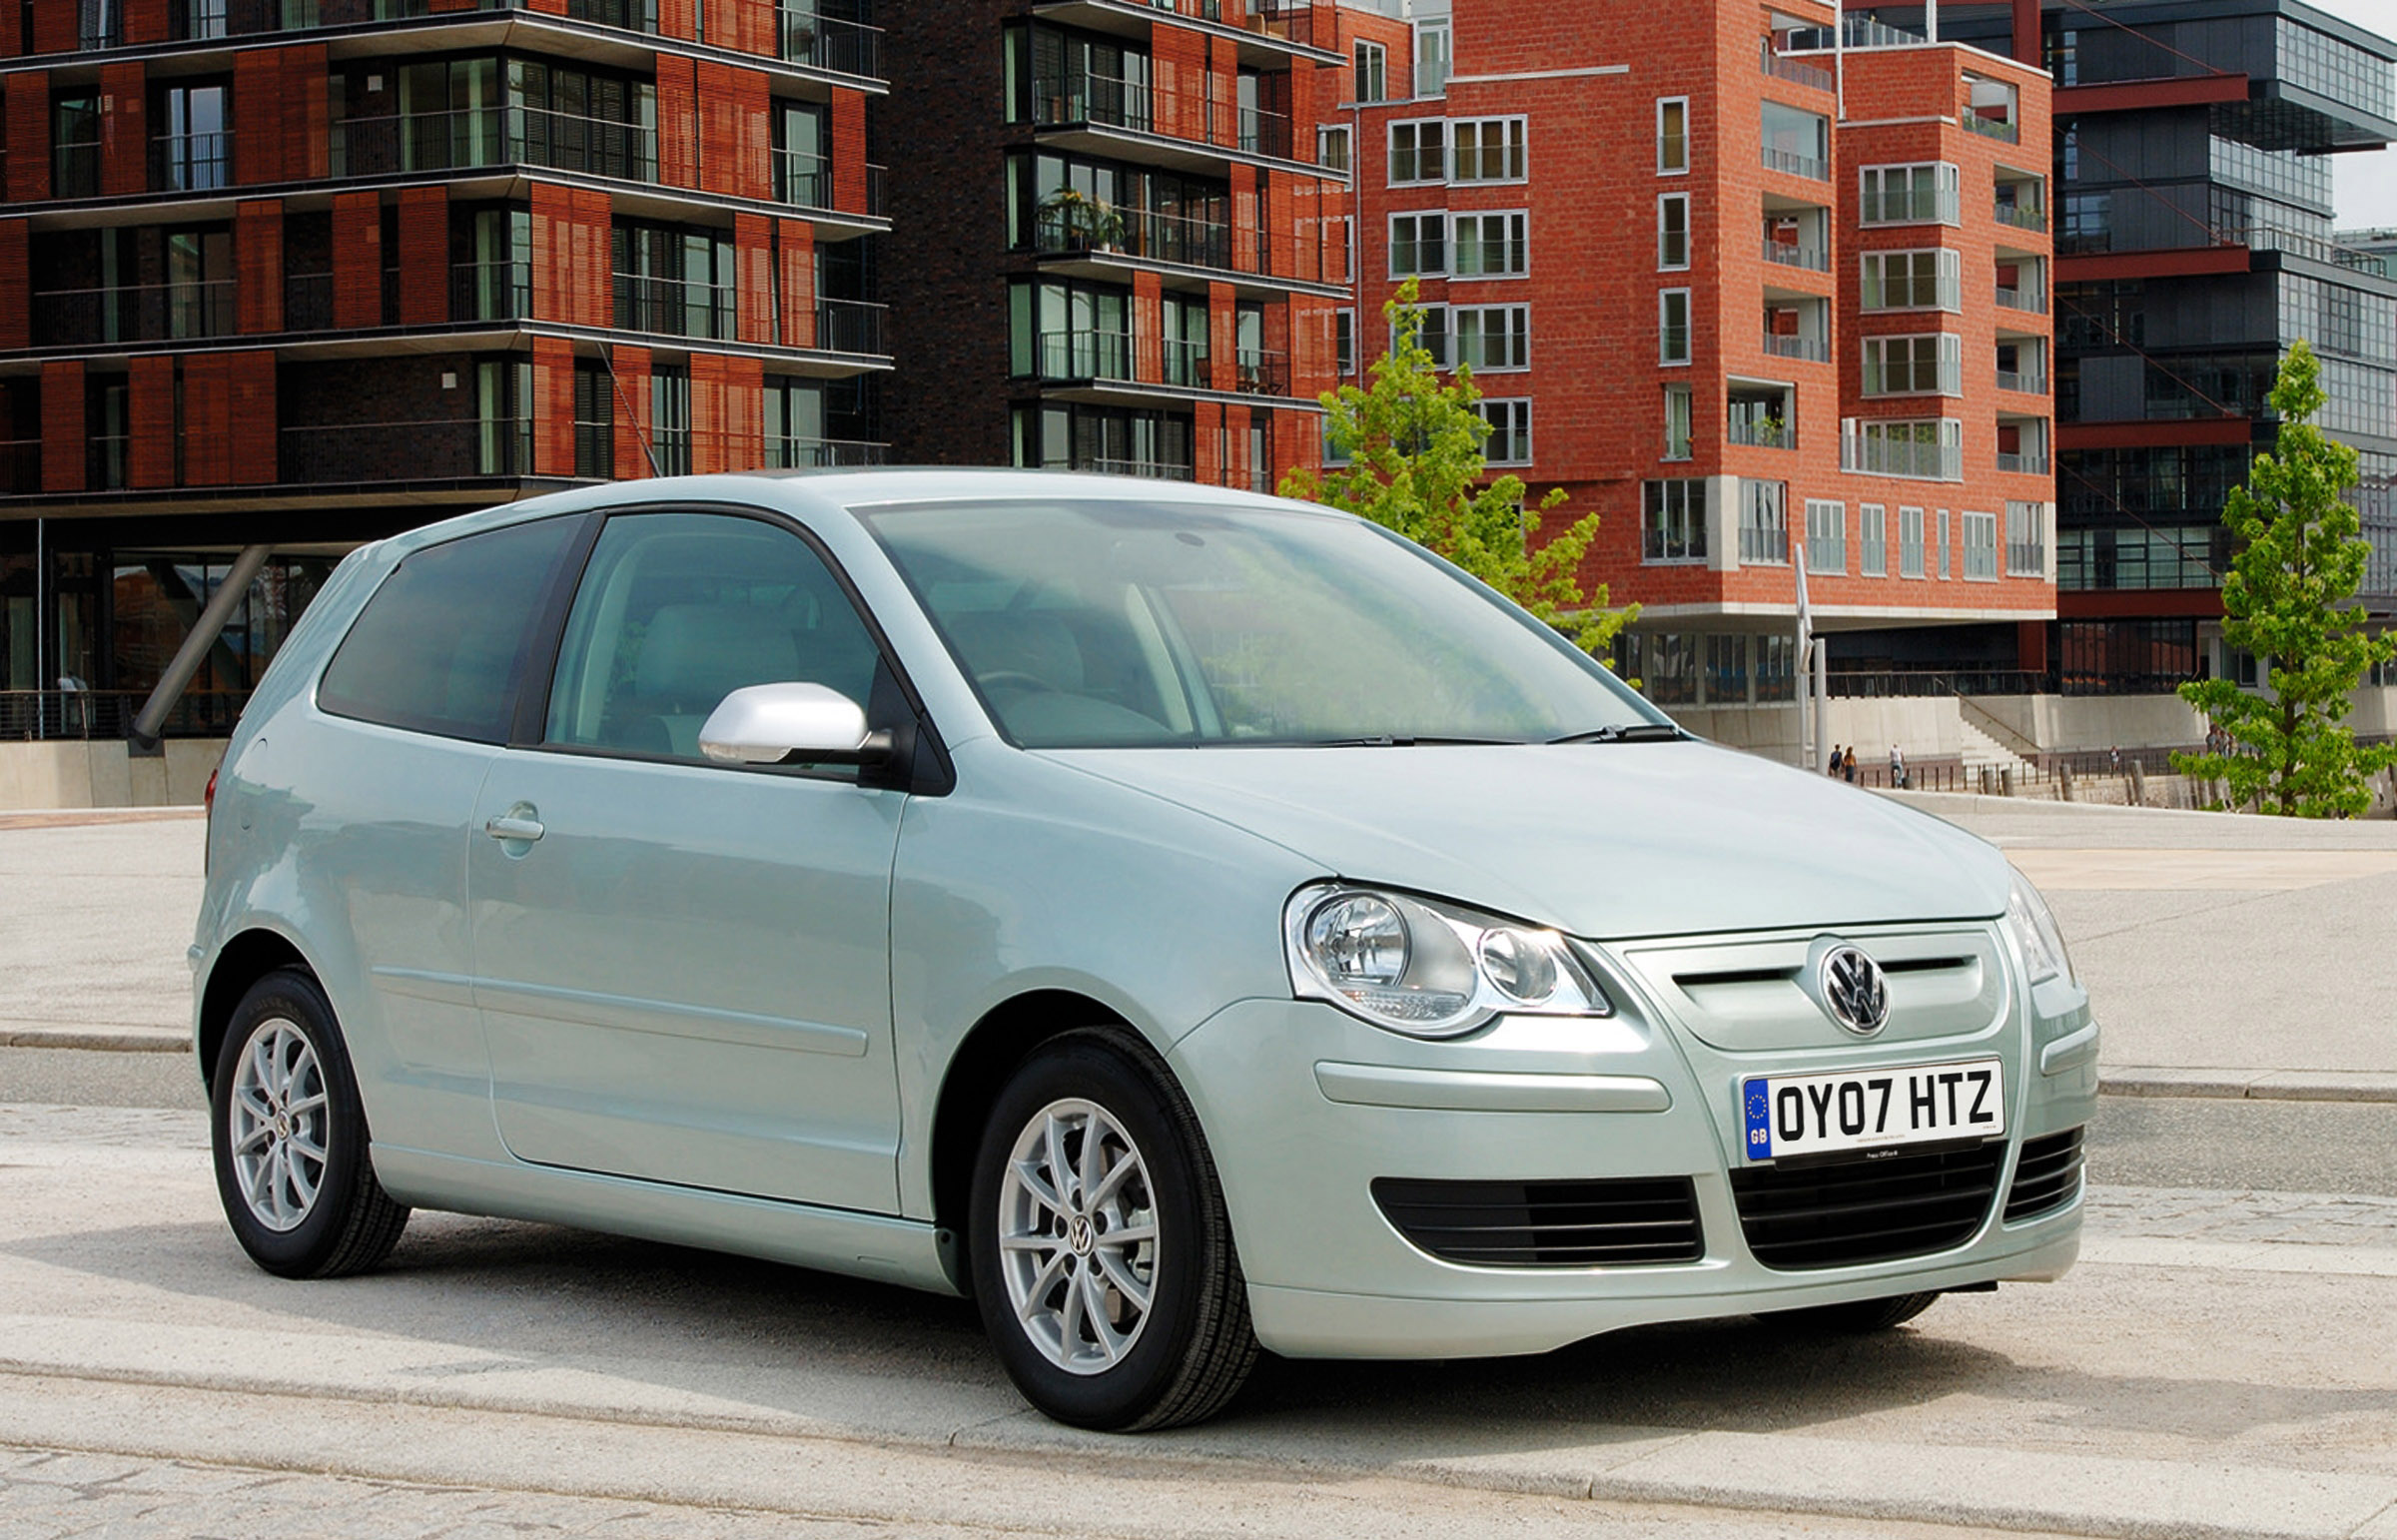 2006 Volkswagen Polo BlueMotion HD Pictures